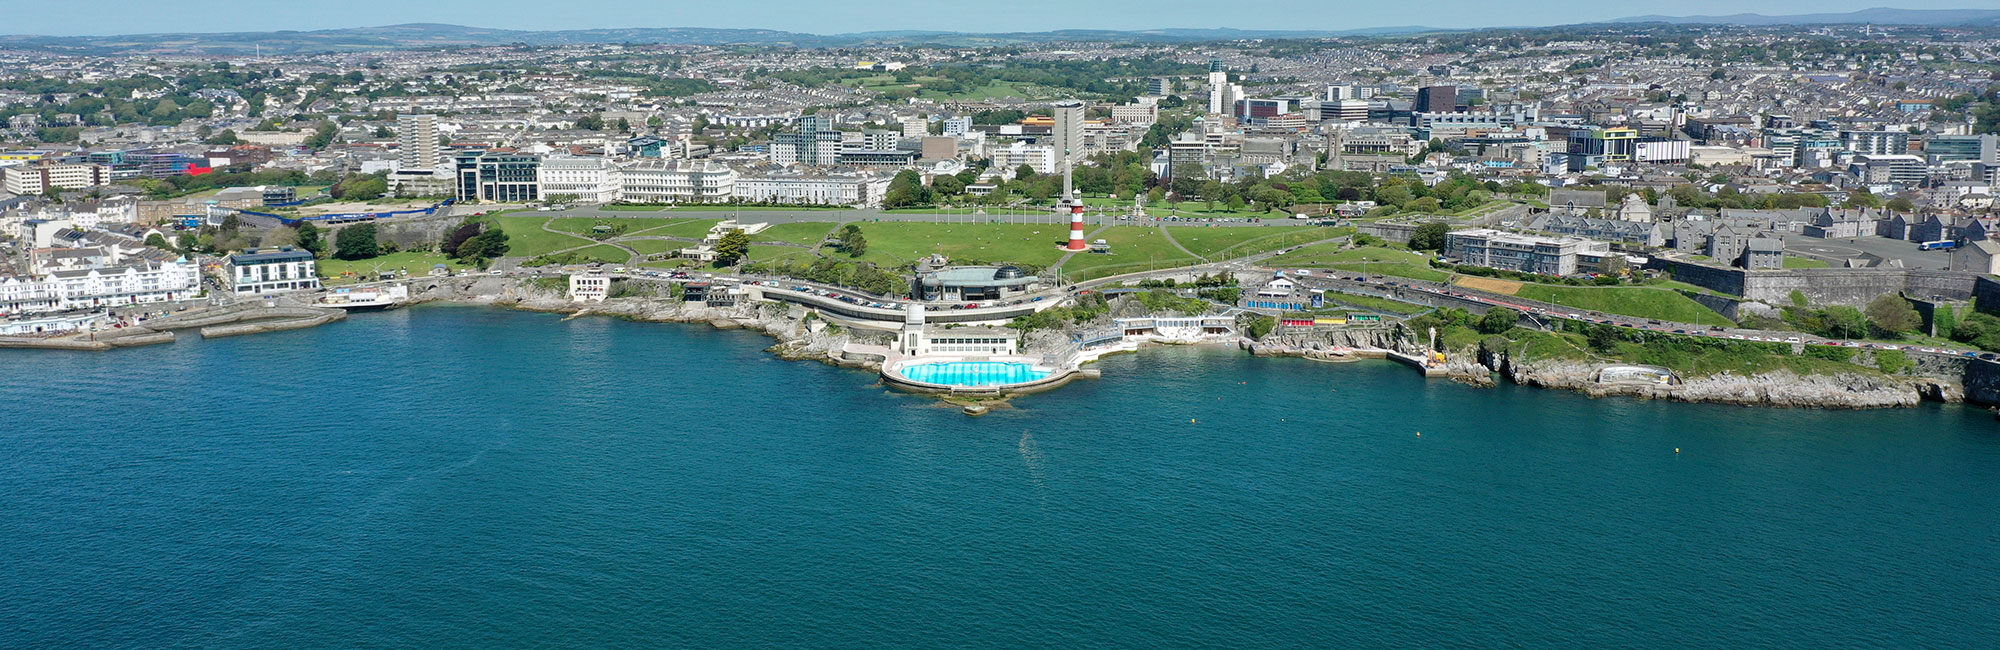 Plymouth Sound from above